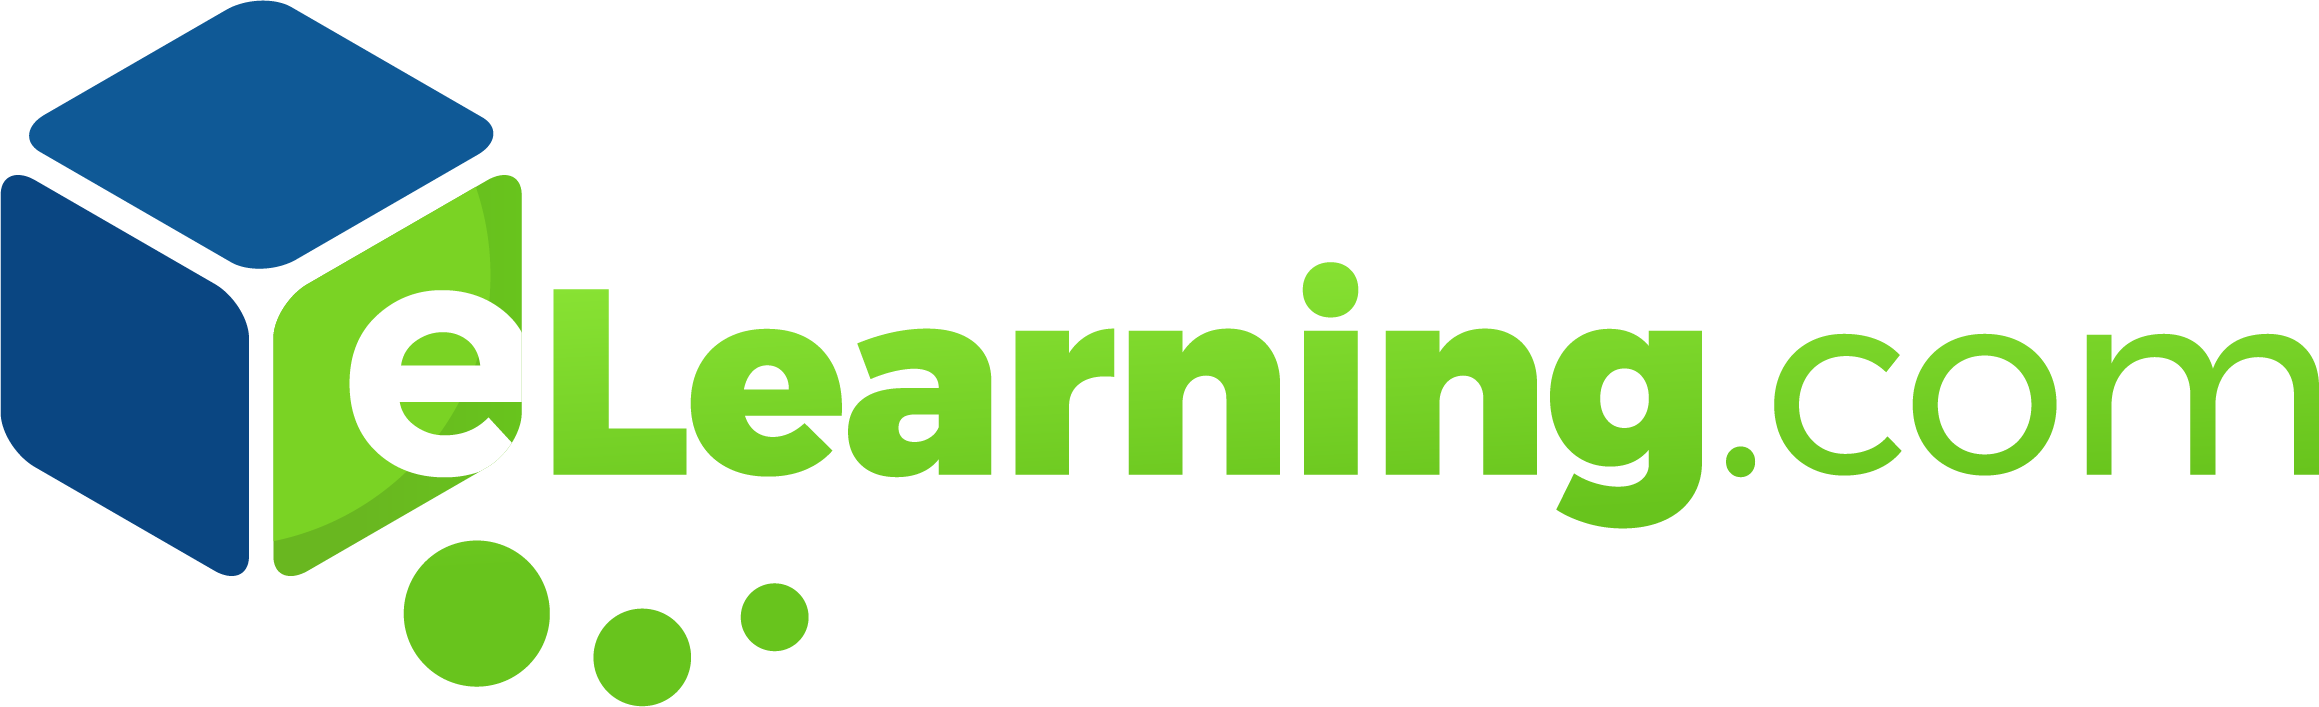 Vmp Elearning - E-learning (2319x707), Png Download